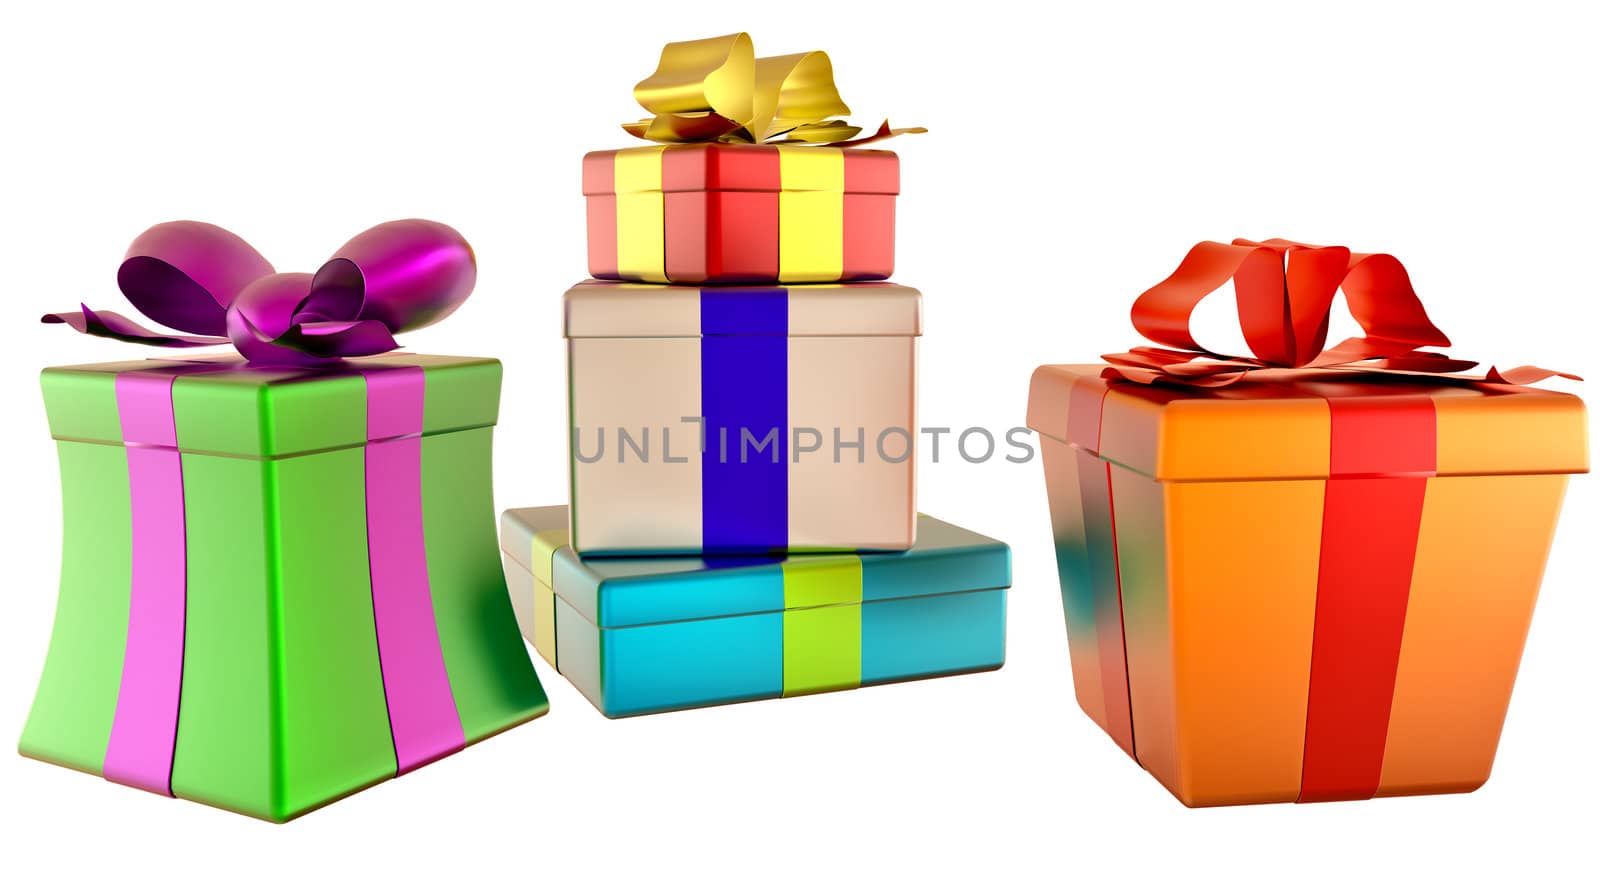 set of orange, yellow, green and white boxes ornamented with the snowflakes and decorated by bows as gifts